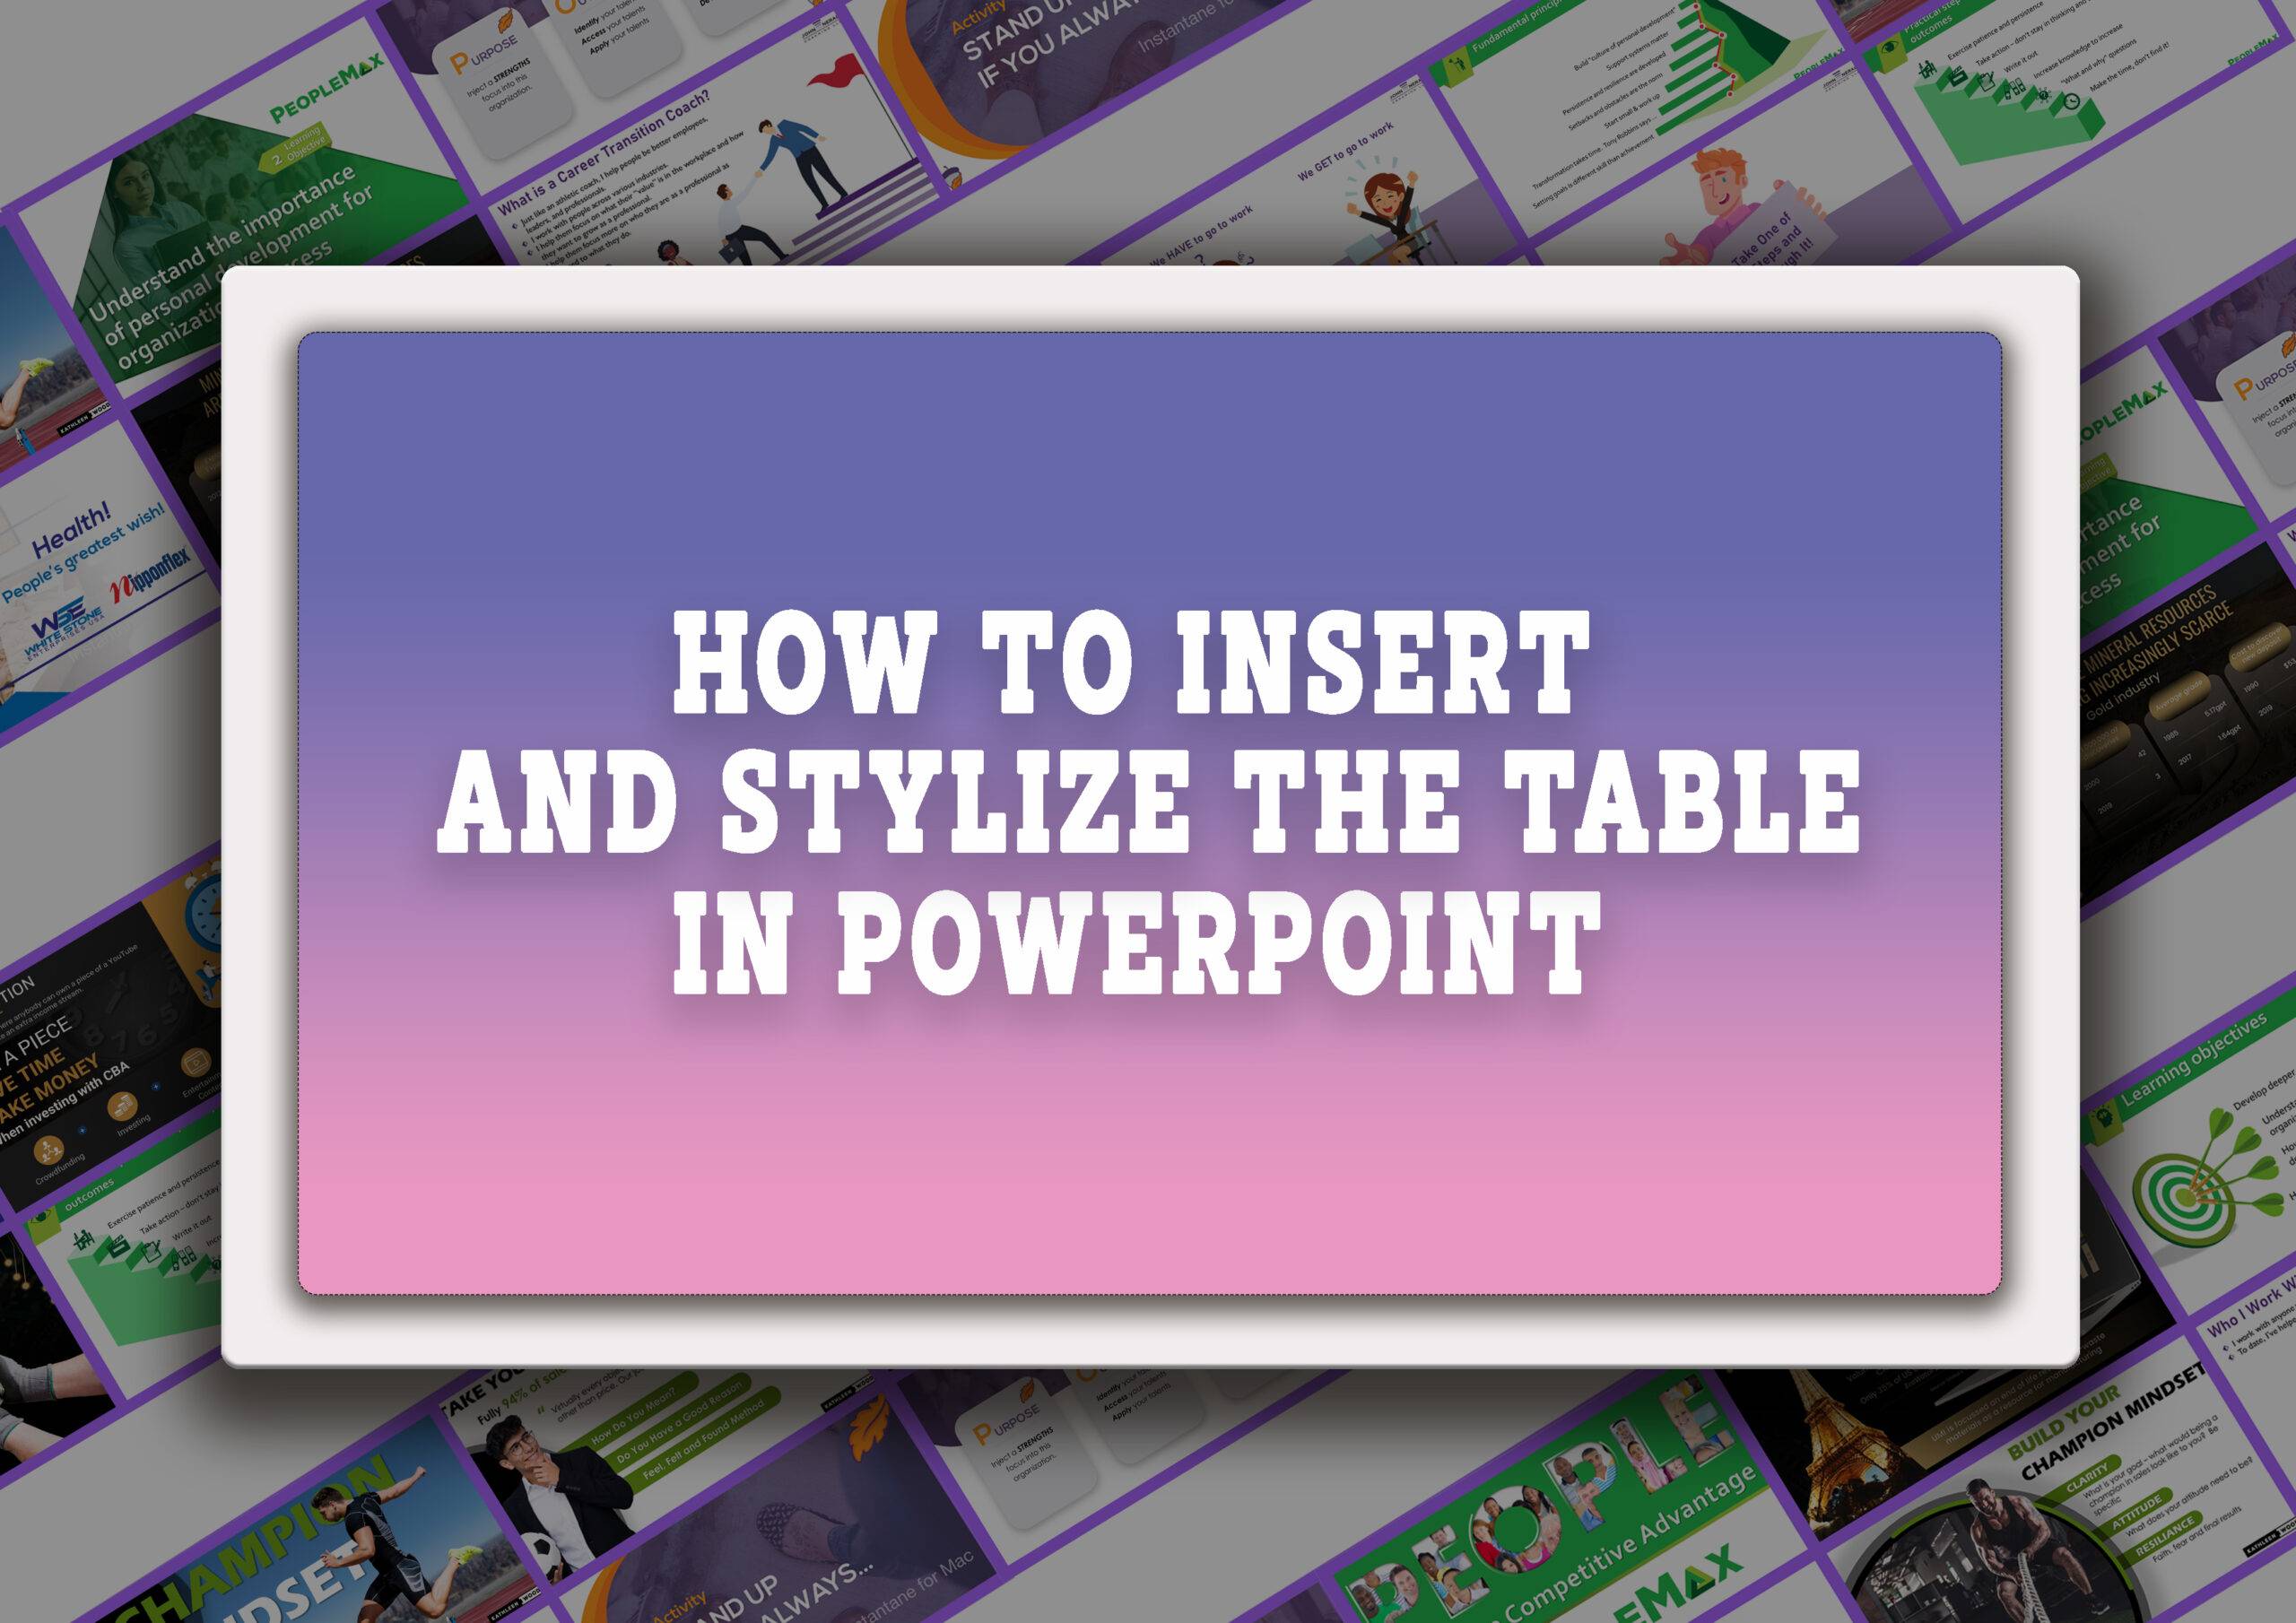 Inserting and stylizing table in PowerPoint